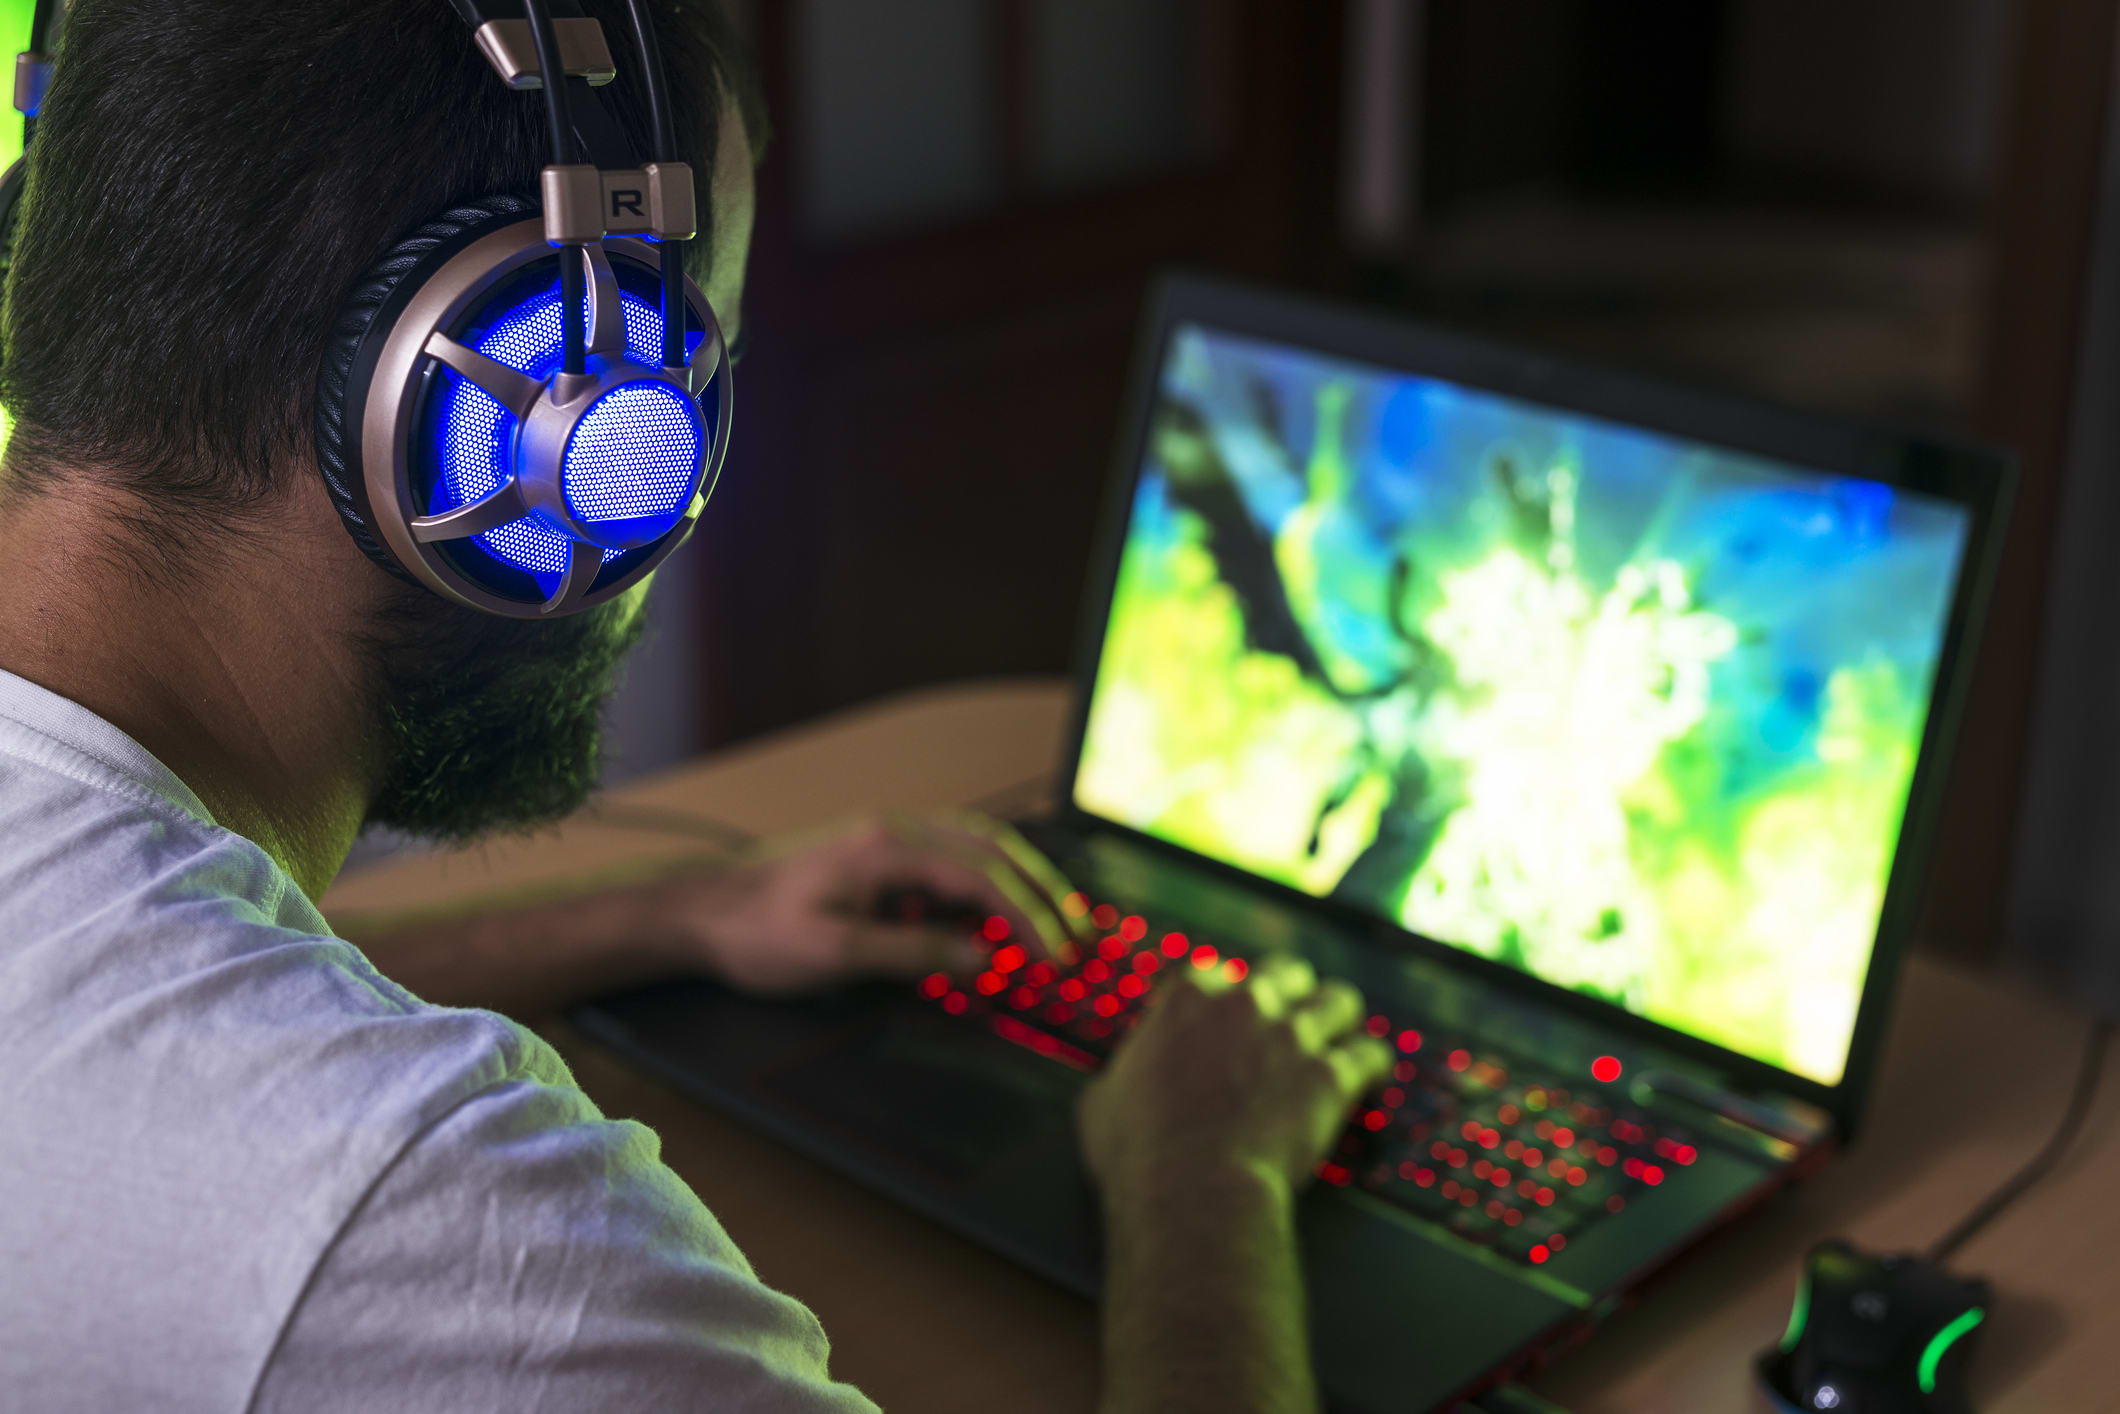 What Are Good Specs for a Gaming Laptop and PC in 2022?